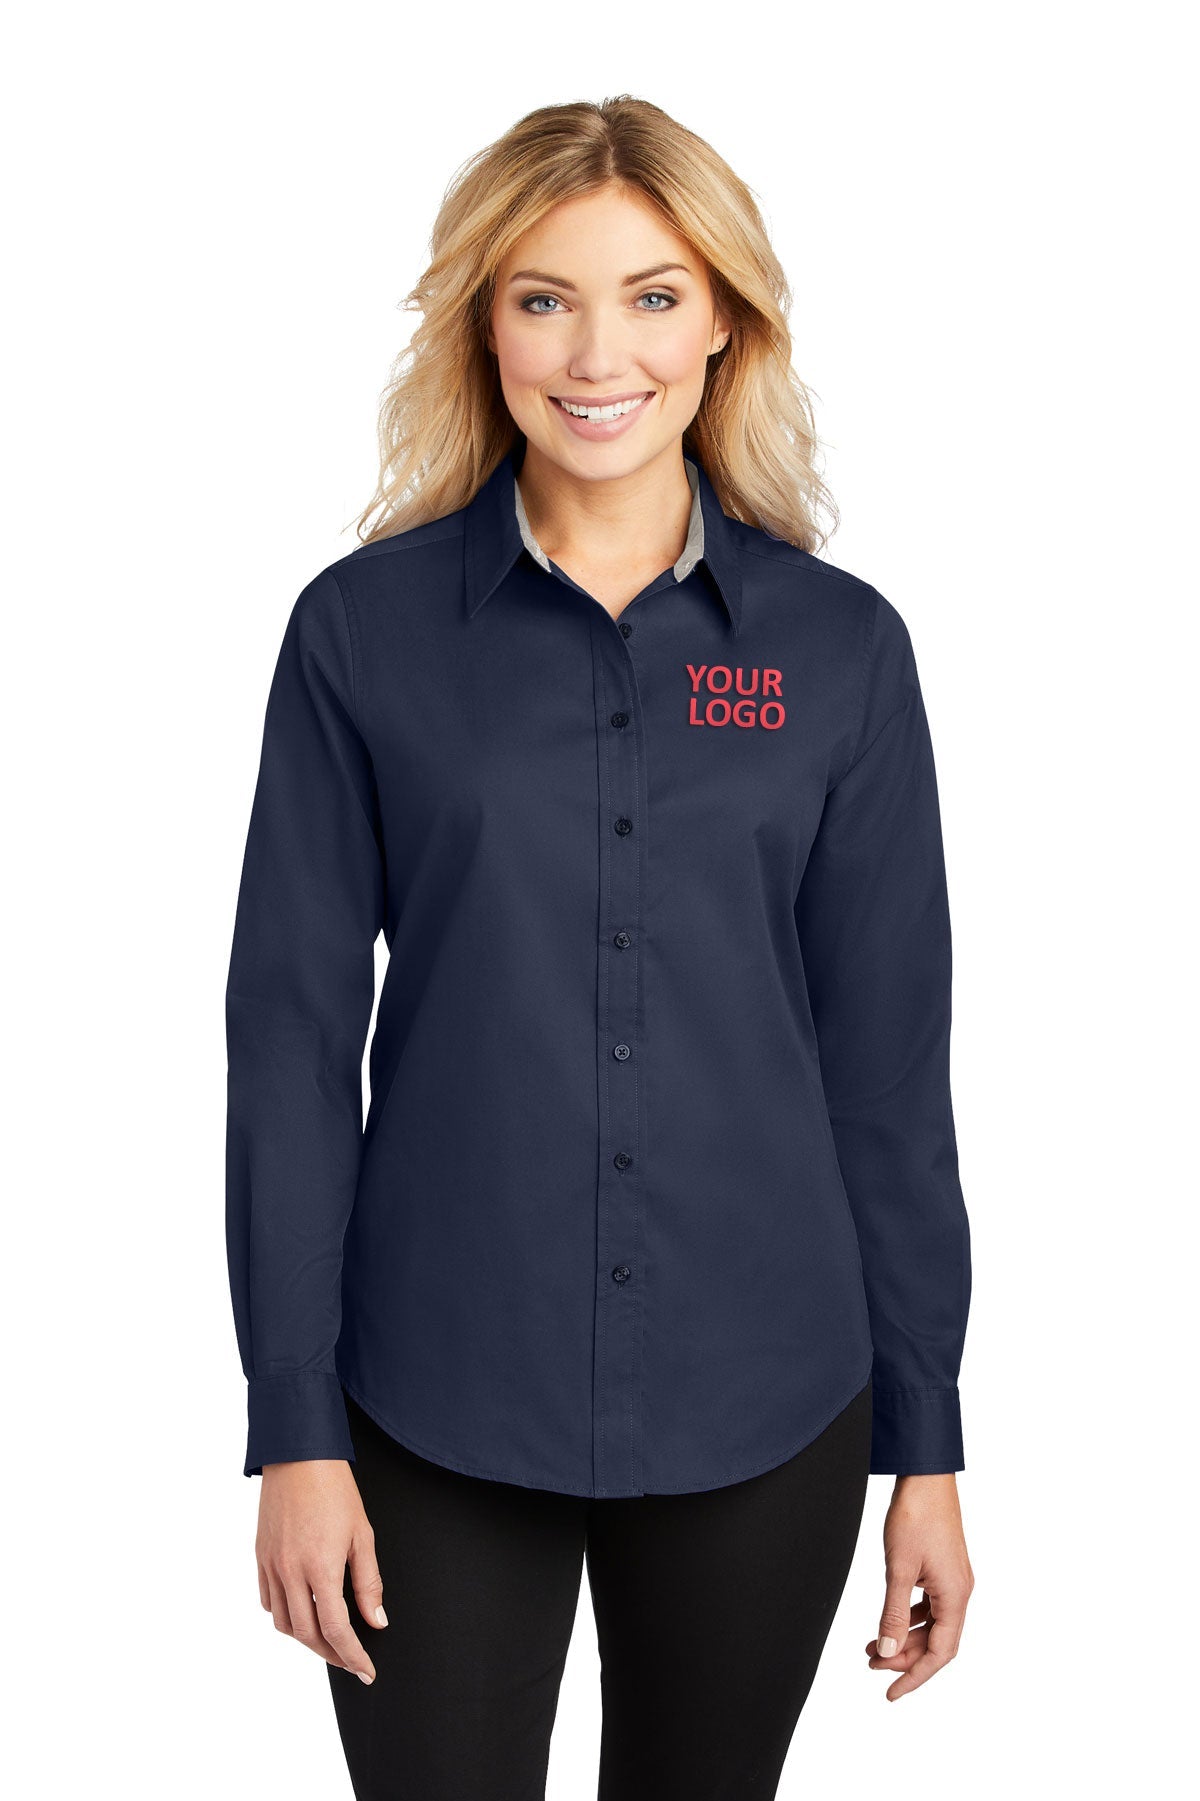 Port Authority Navy/Light Stone L608 custom embroidered shirts